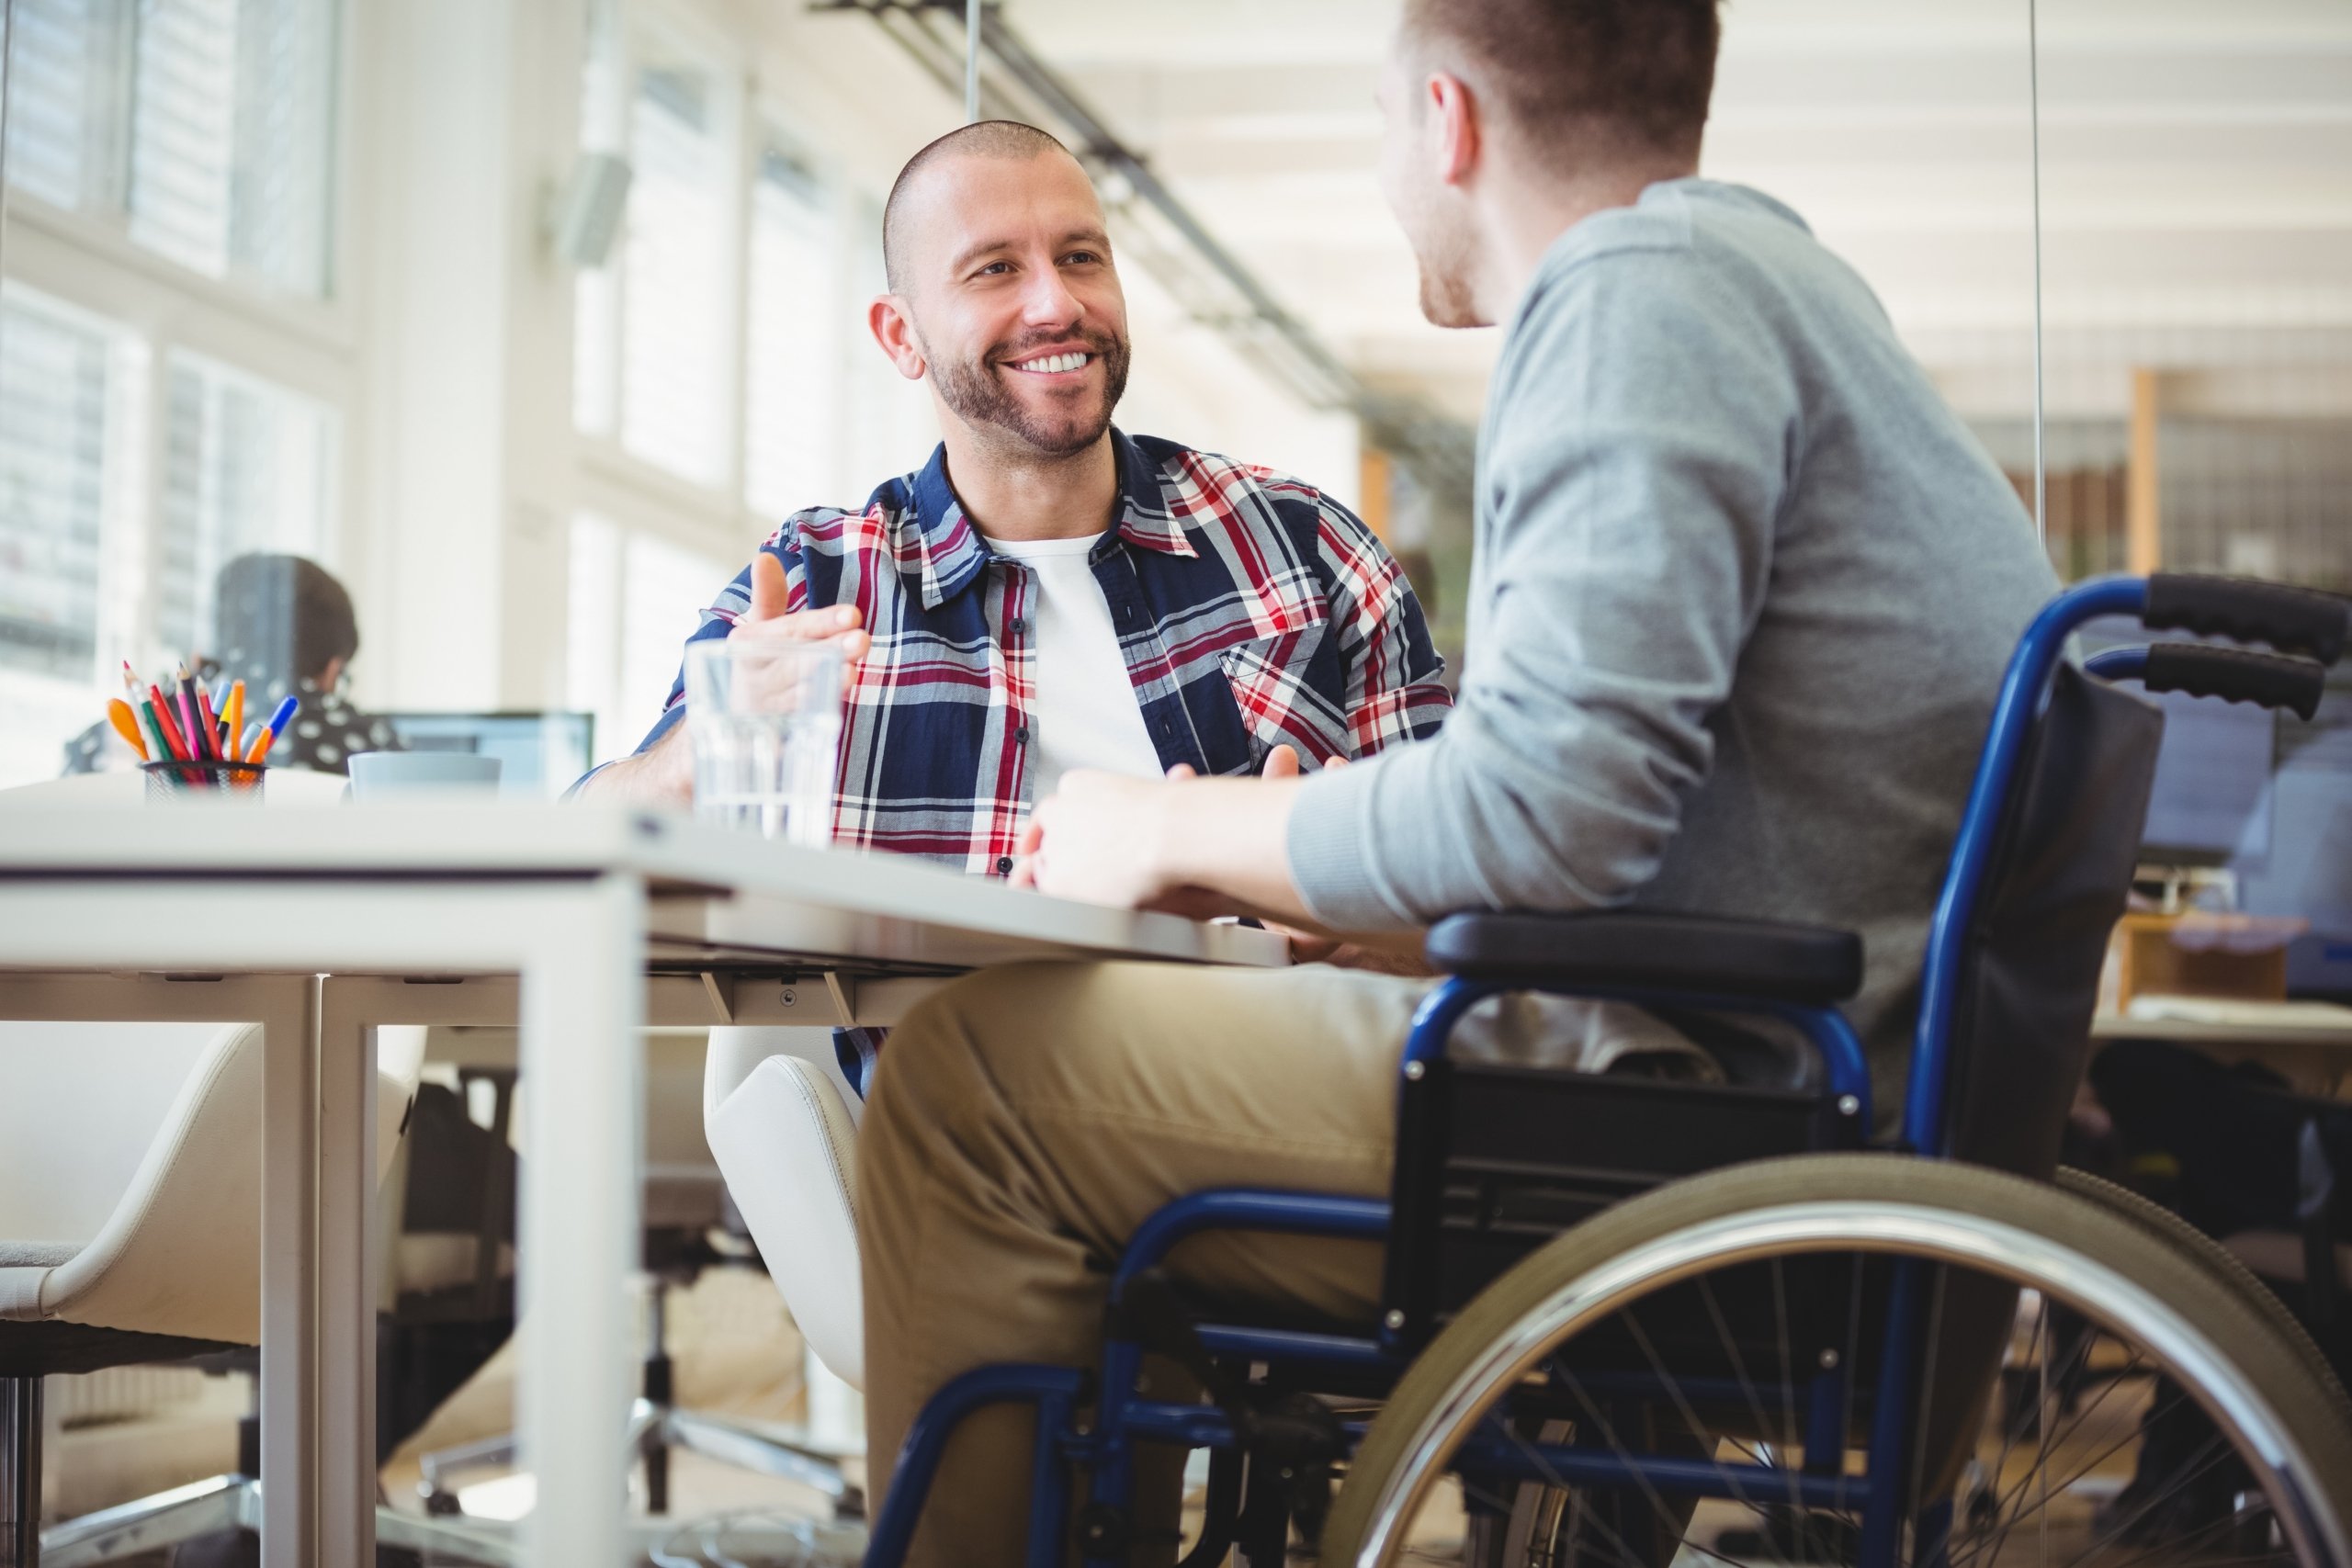 NDIS support coordination